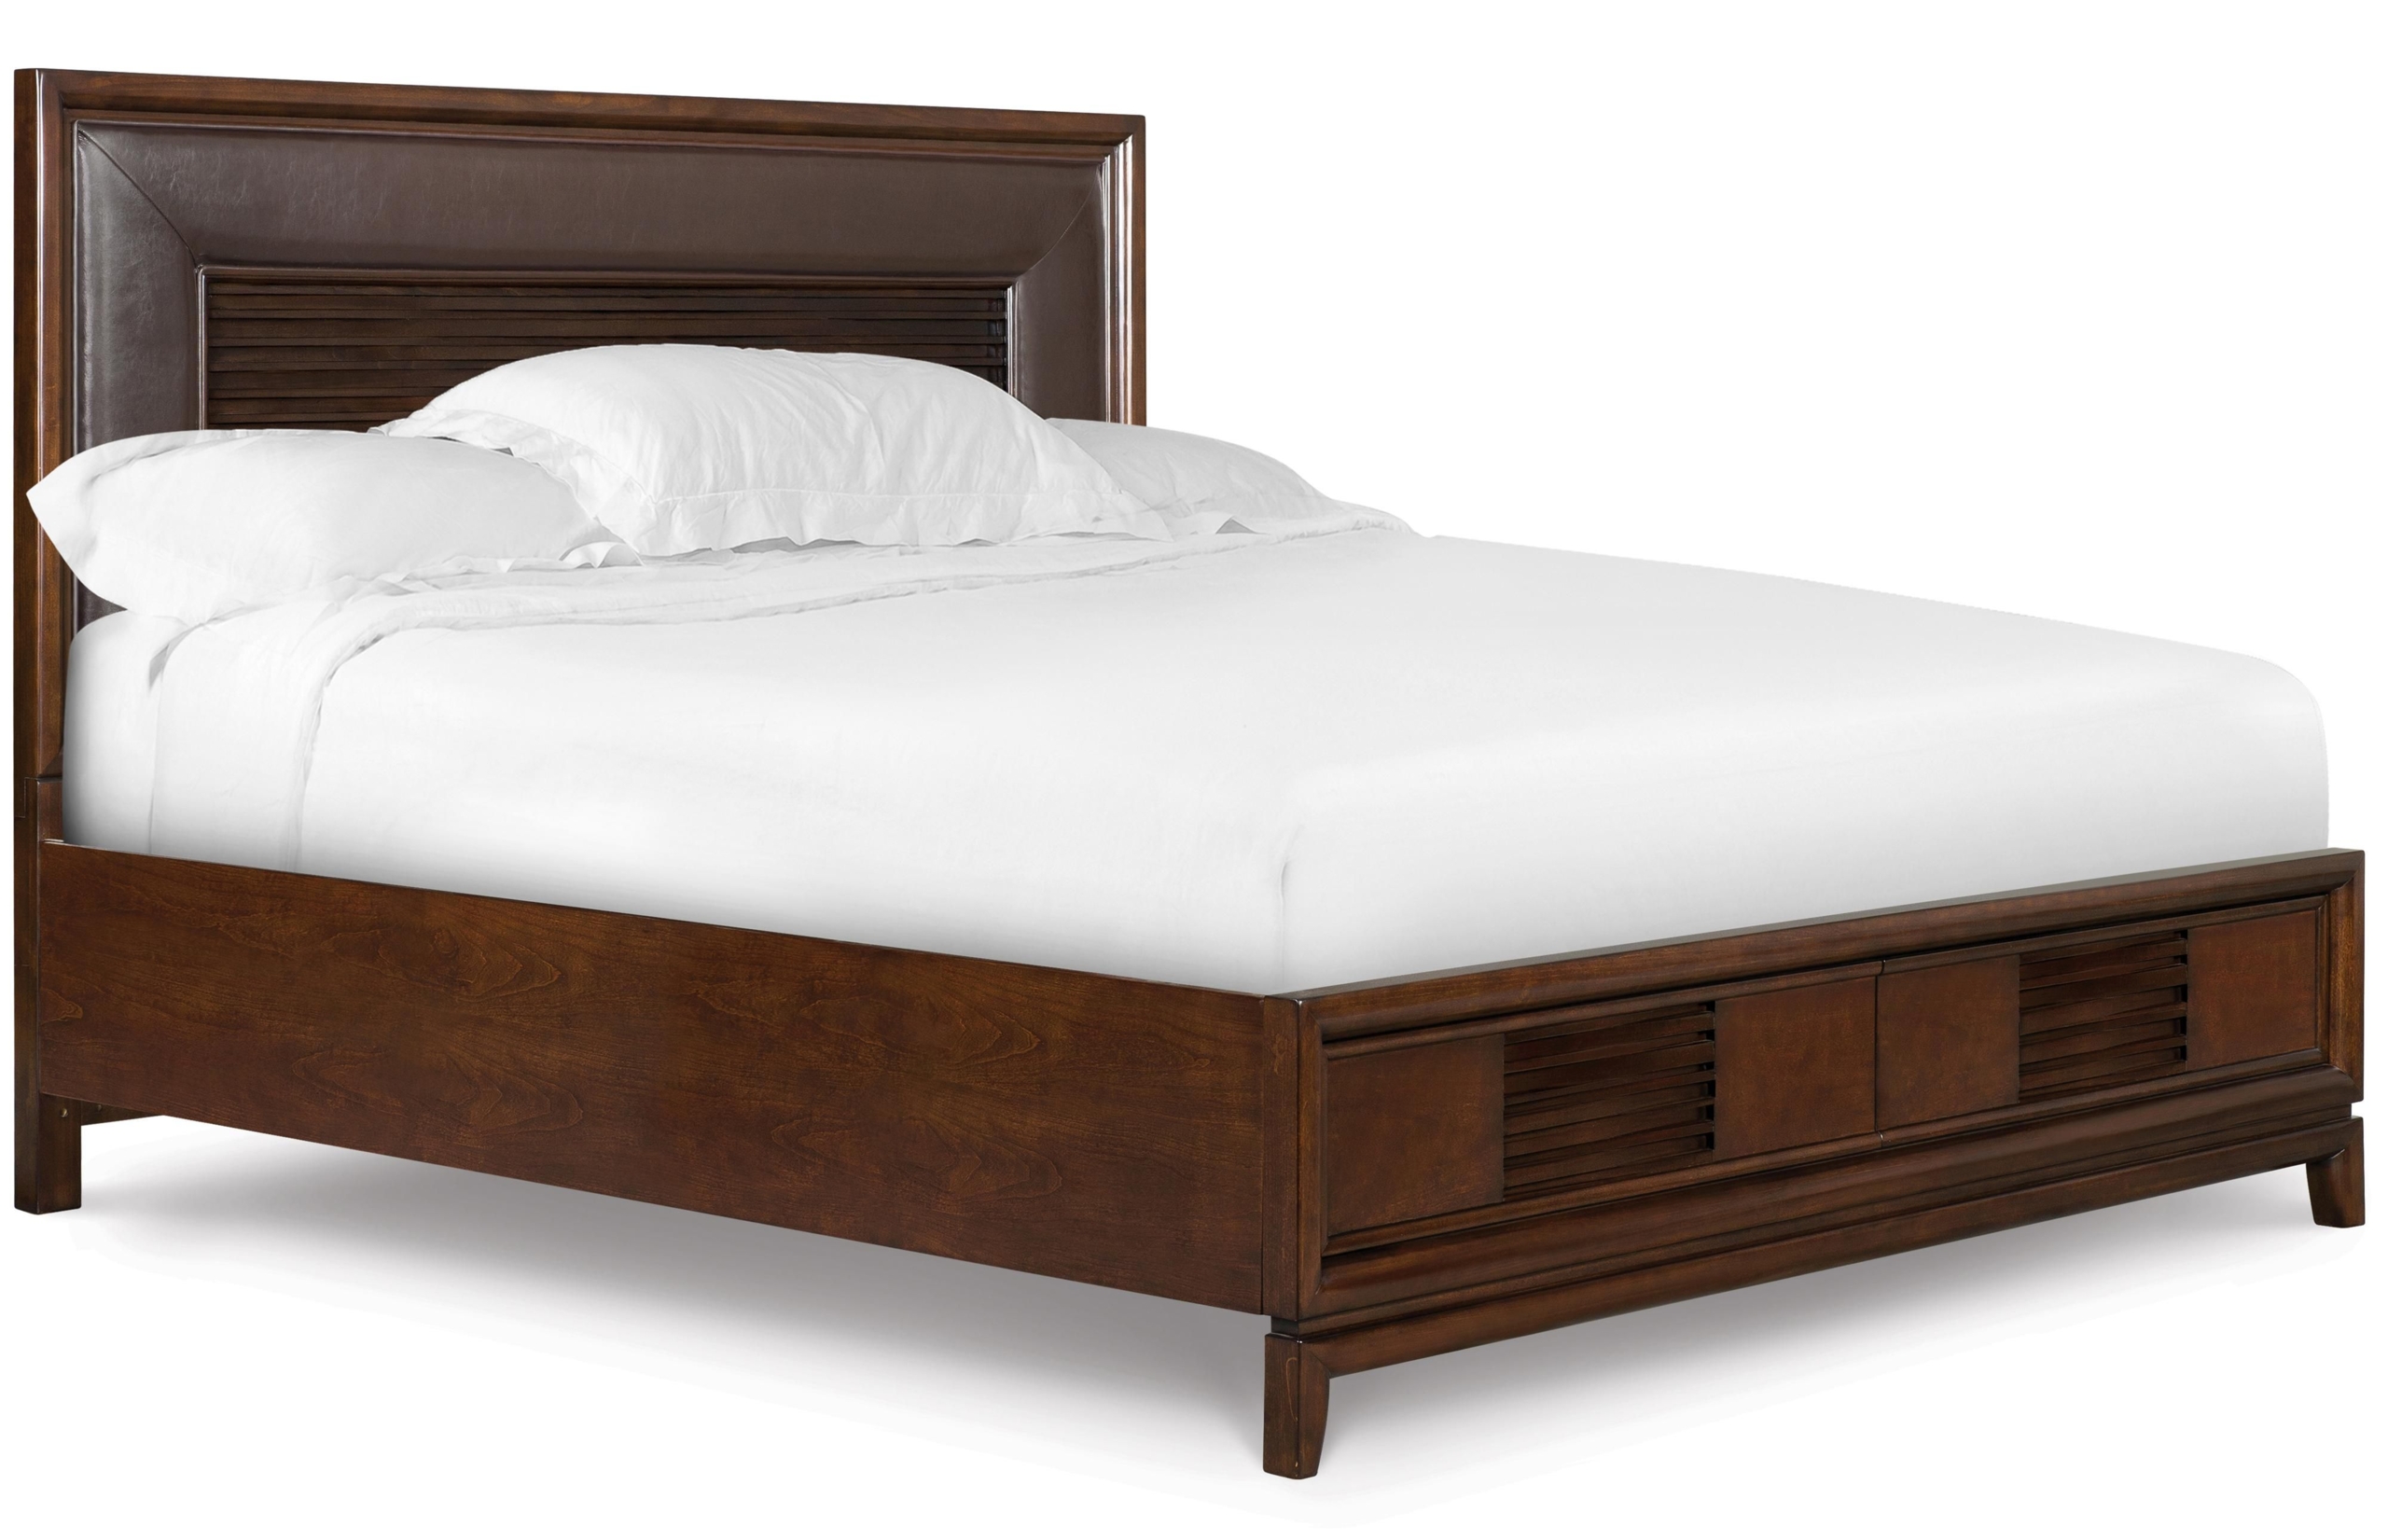 Natural wooden king size island bed with faux leather headboard